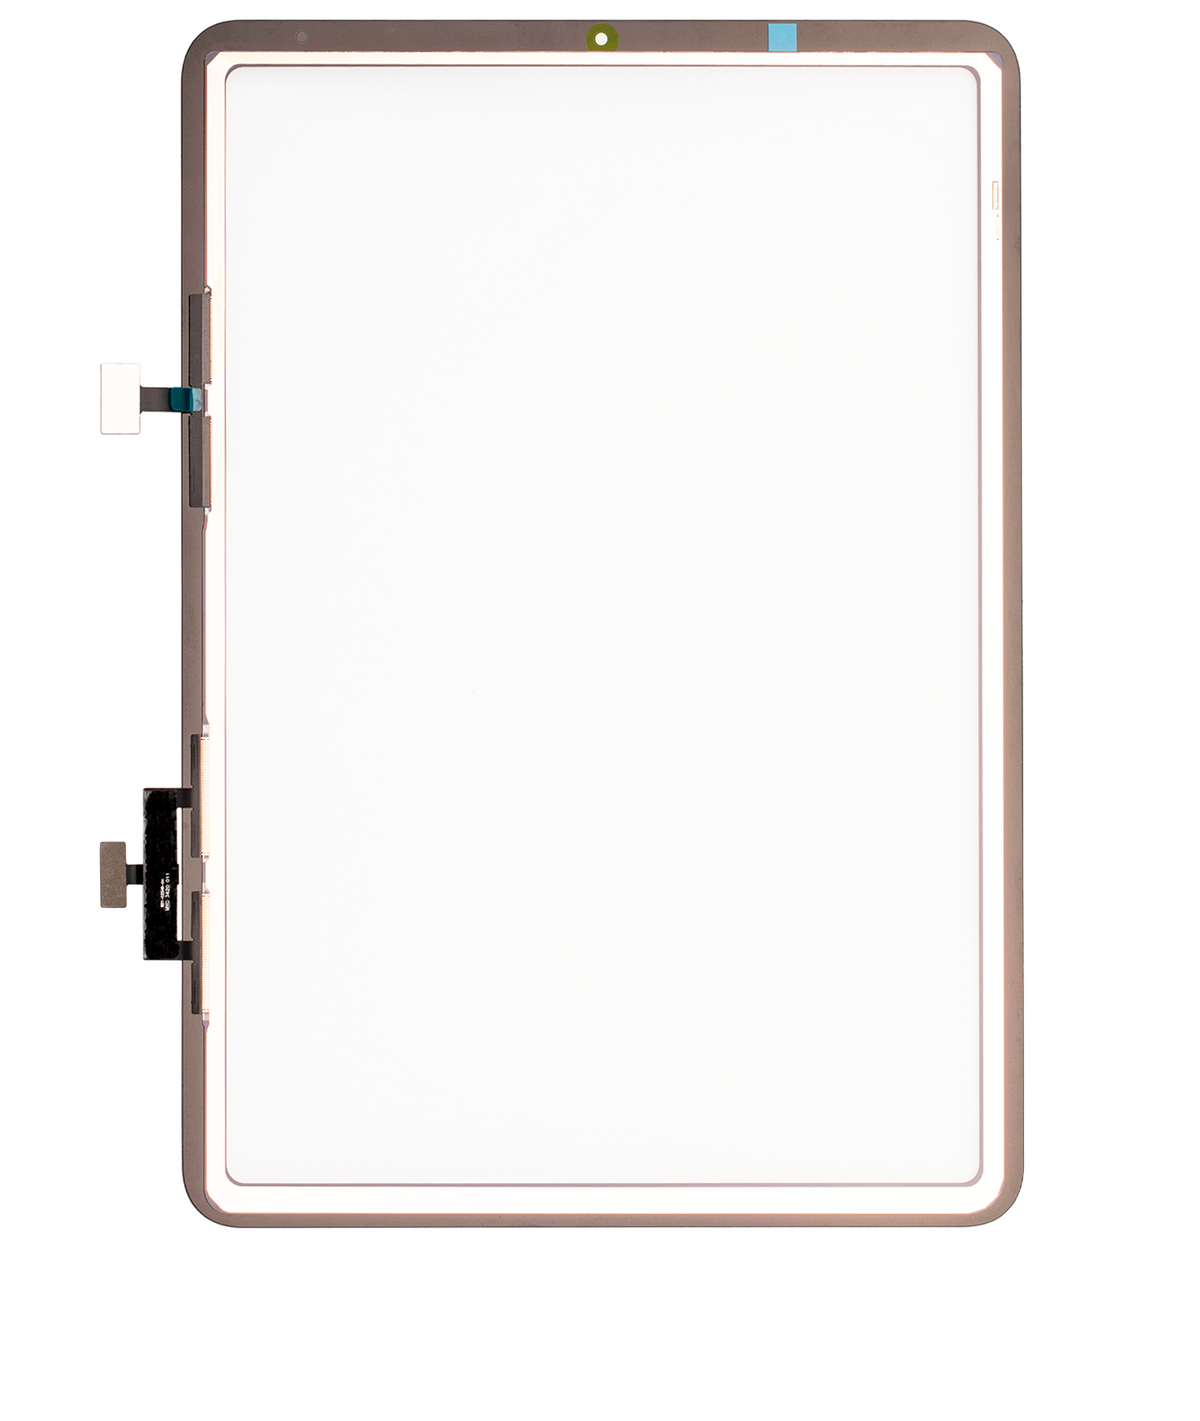 DIGITIZER (GLASS SEPARATION REQUIRED) (WIFI VERSION) FOR IPAD AIR 4